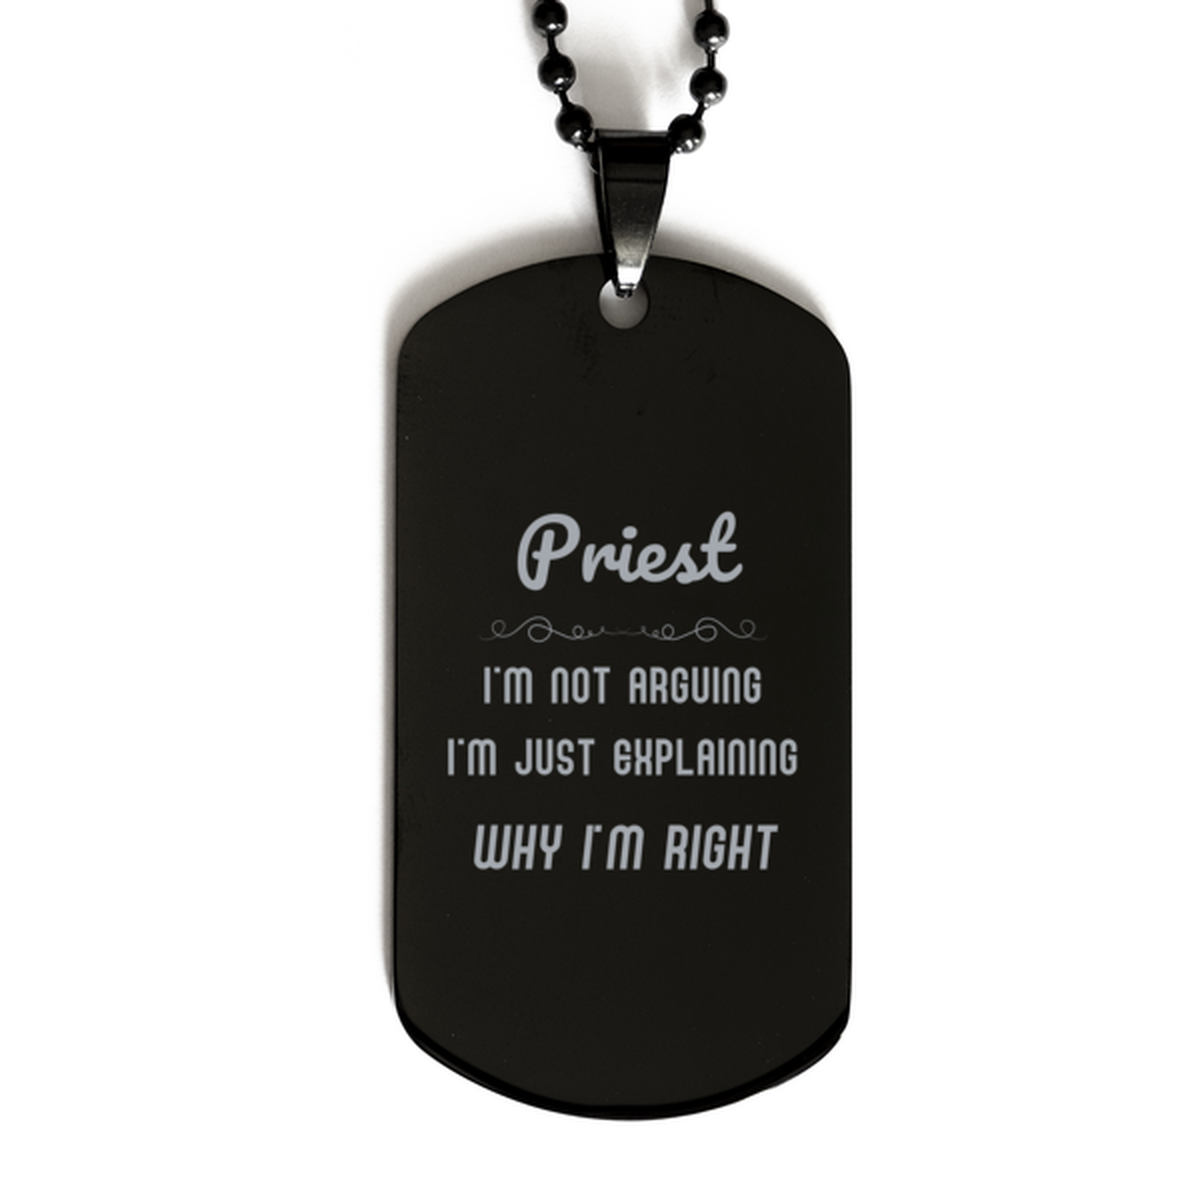 Priest I'm not Arguing. I'm Just Explaining Why I'm RIGHT Black Dog Tag, Funny Saying Quote Priest Gifts For Priest Graduation Birthday Christmas Gifts for Men Women Coworker